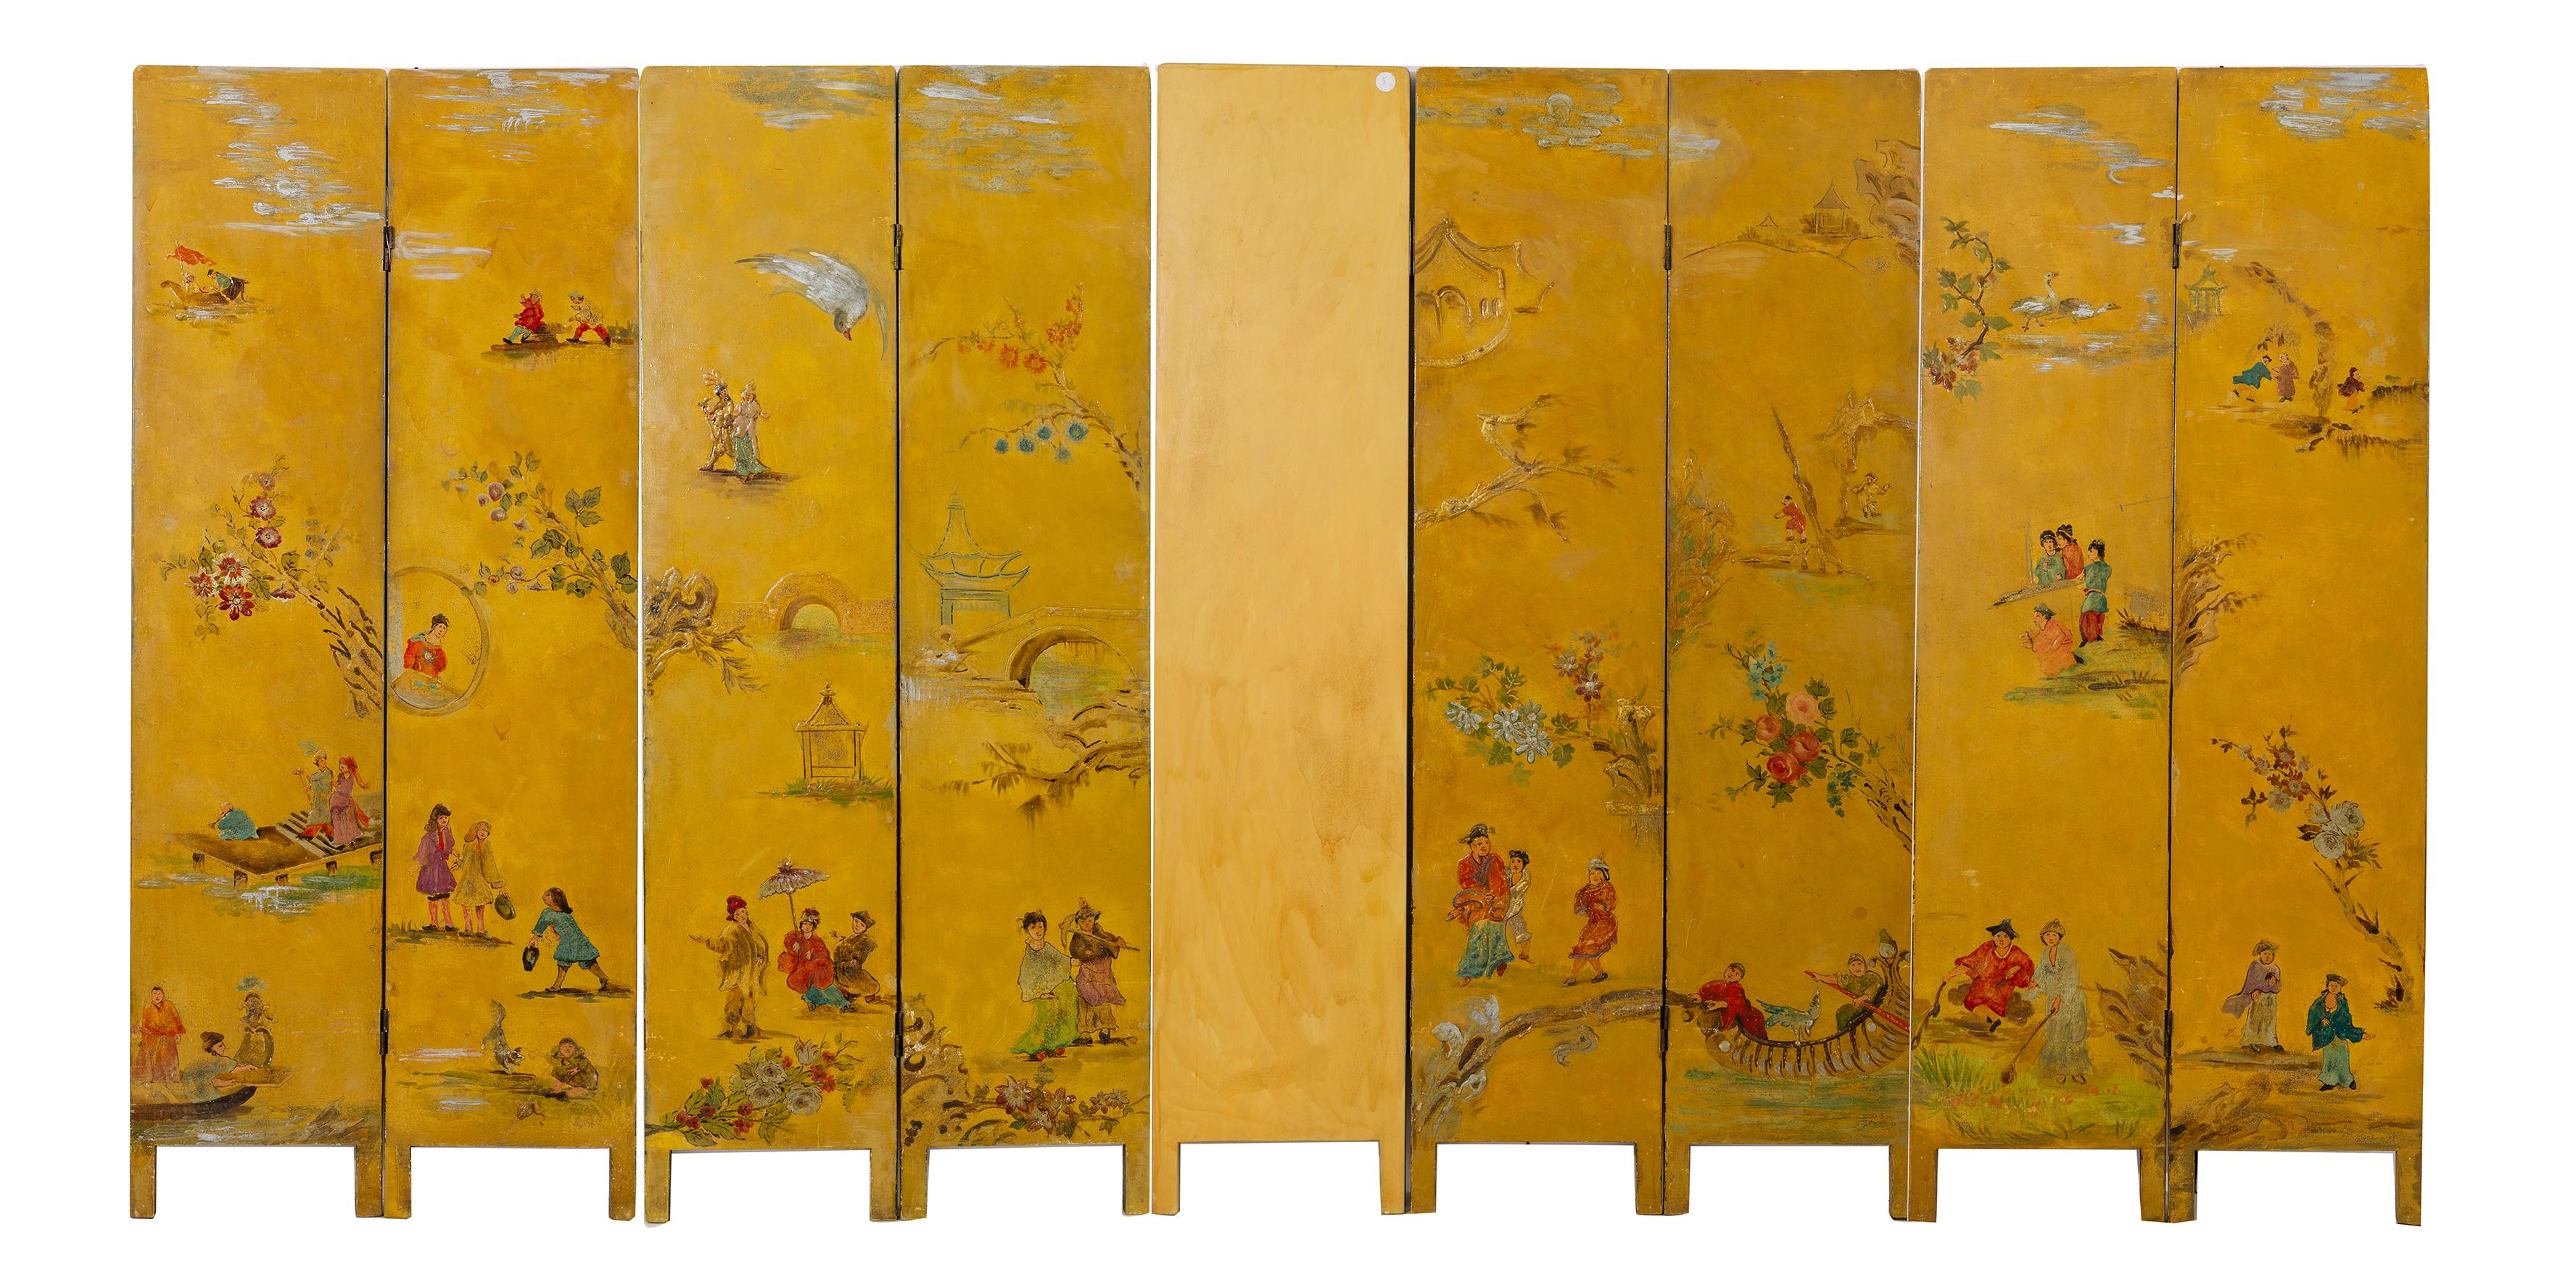 M/781 - Interesting large  hand painted on wood  high screen : from France, mid '800. 
It can be the background of an entire wall: an imaginary garden with flowers' triumph; on the other side: Chinese lacquered.
Total nr. 9 panels in wood